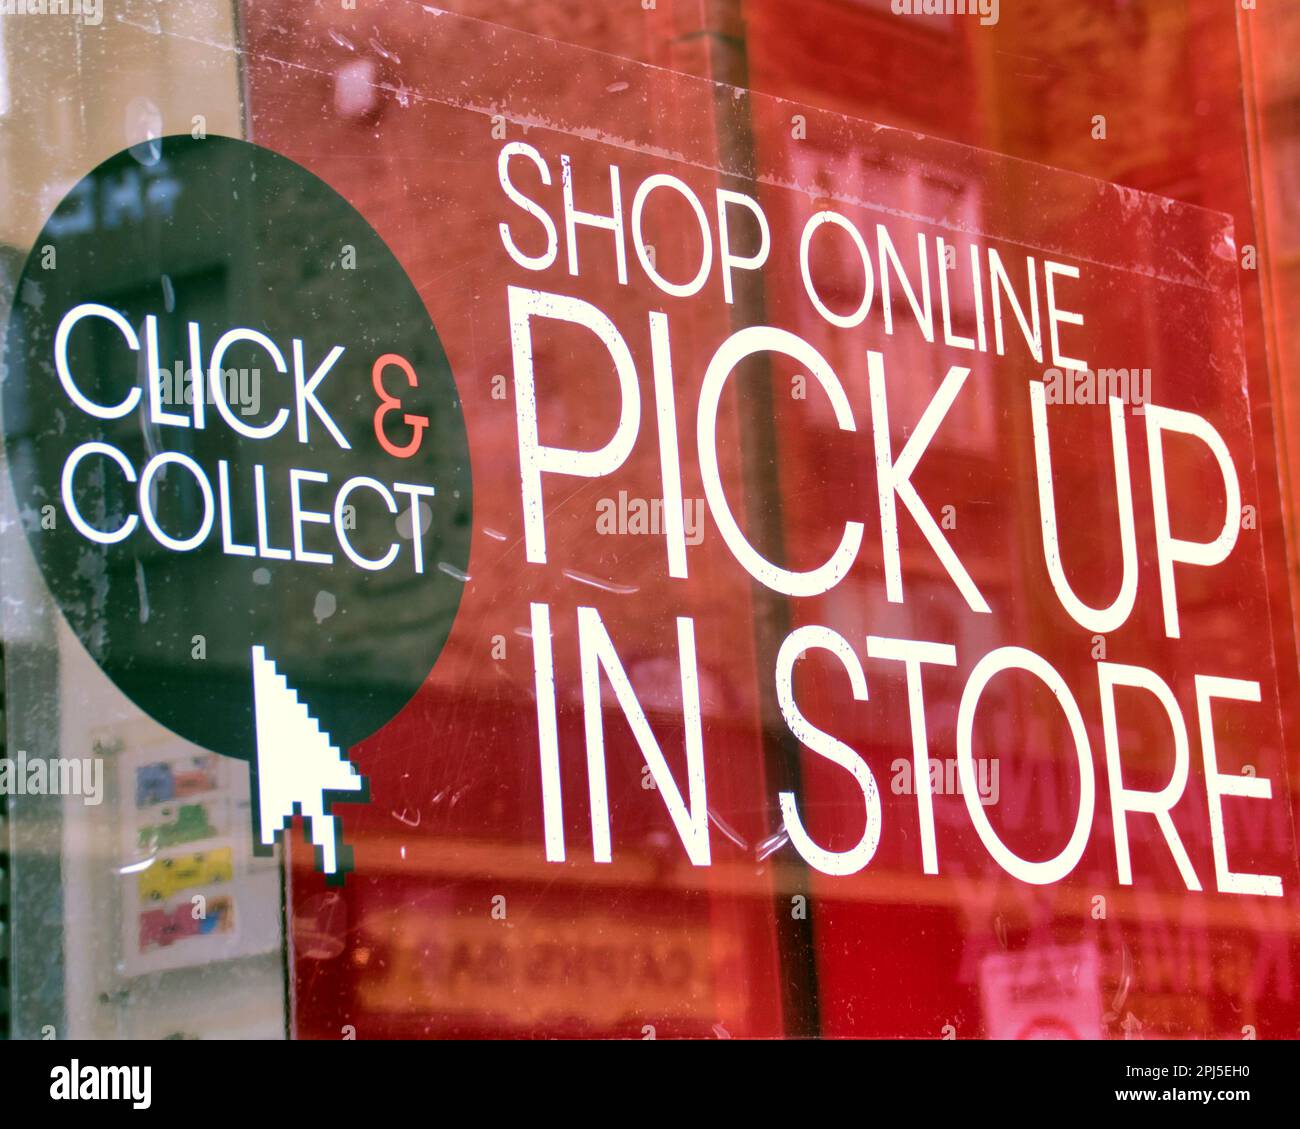 Click-and-Collect-Shop Online-Abholung im Shop Stockfoto